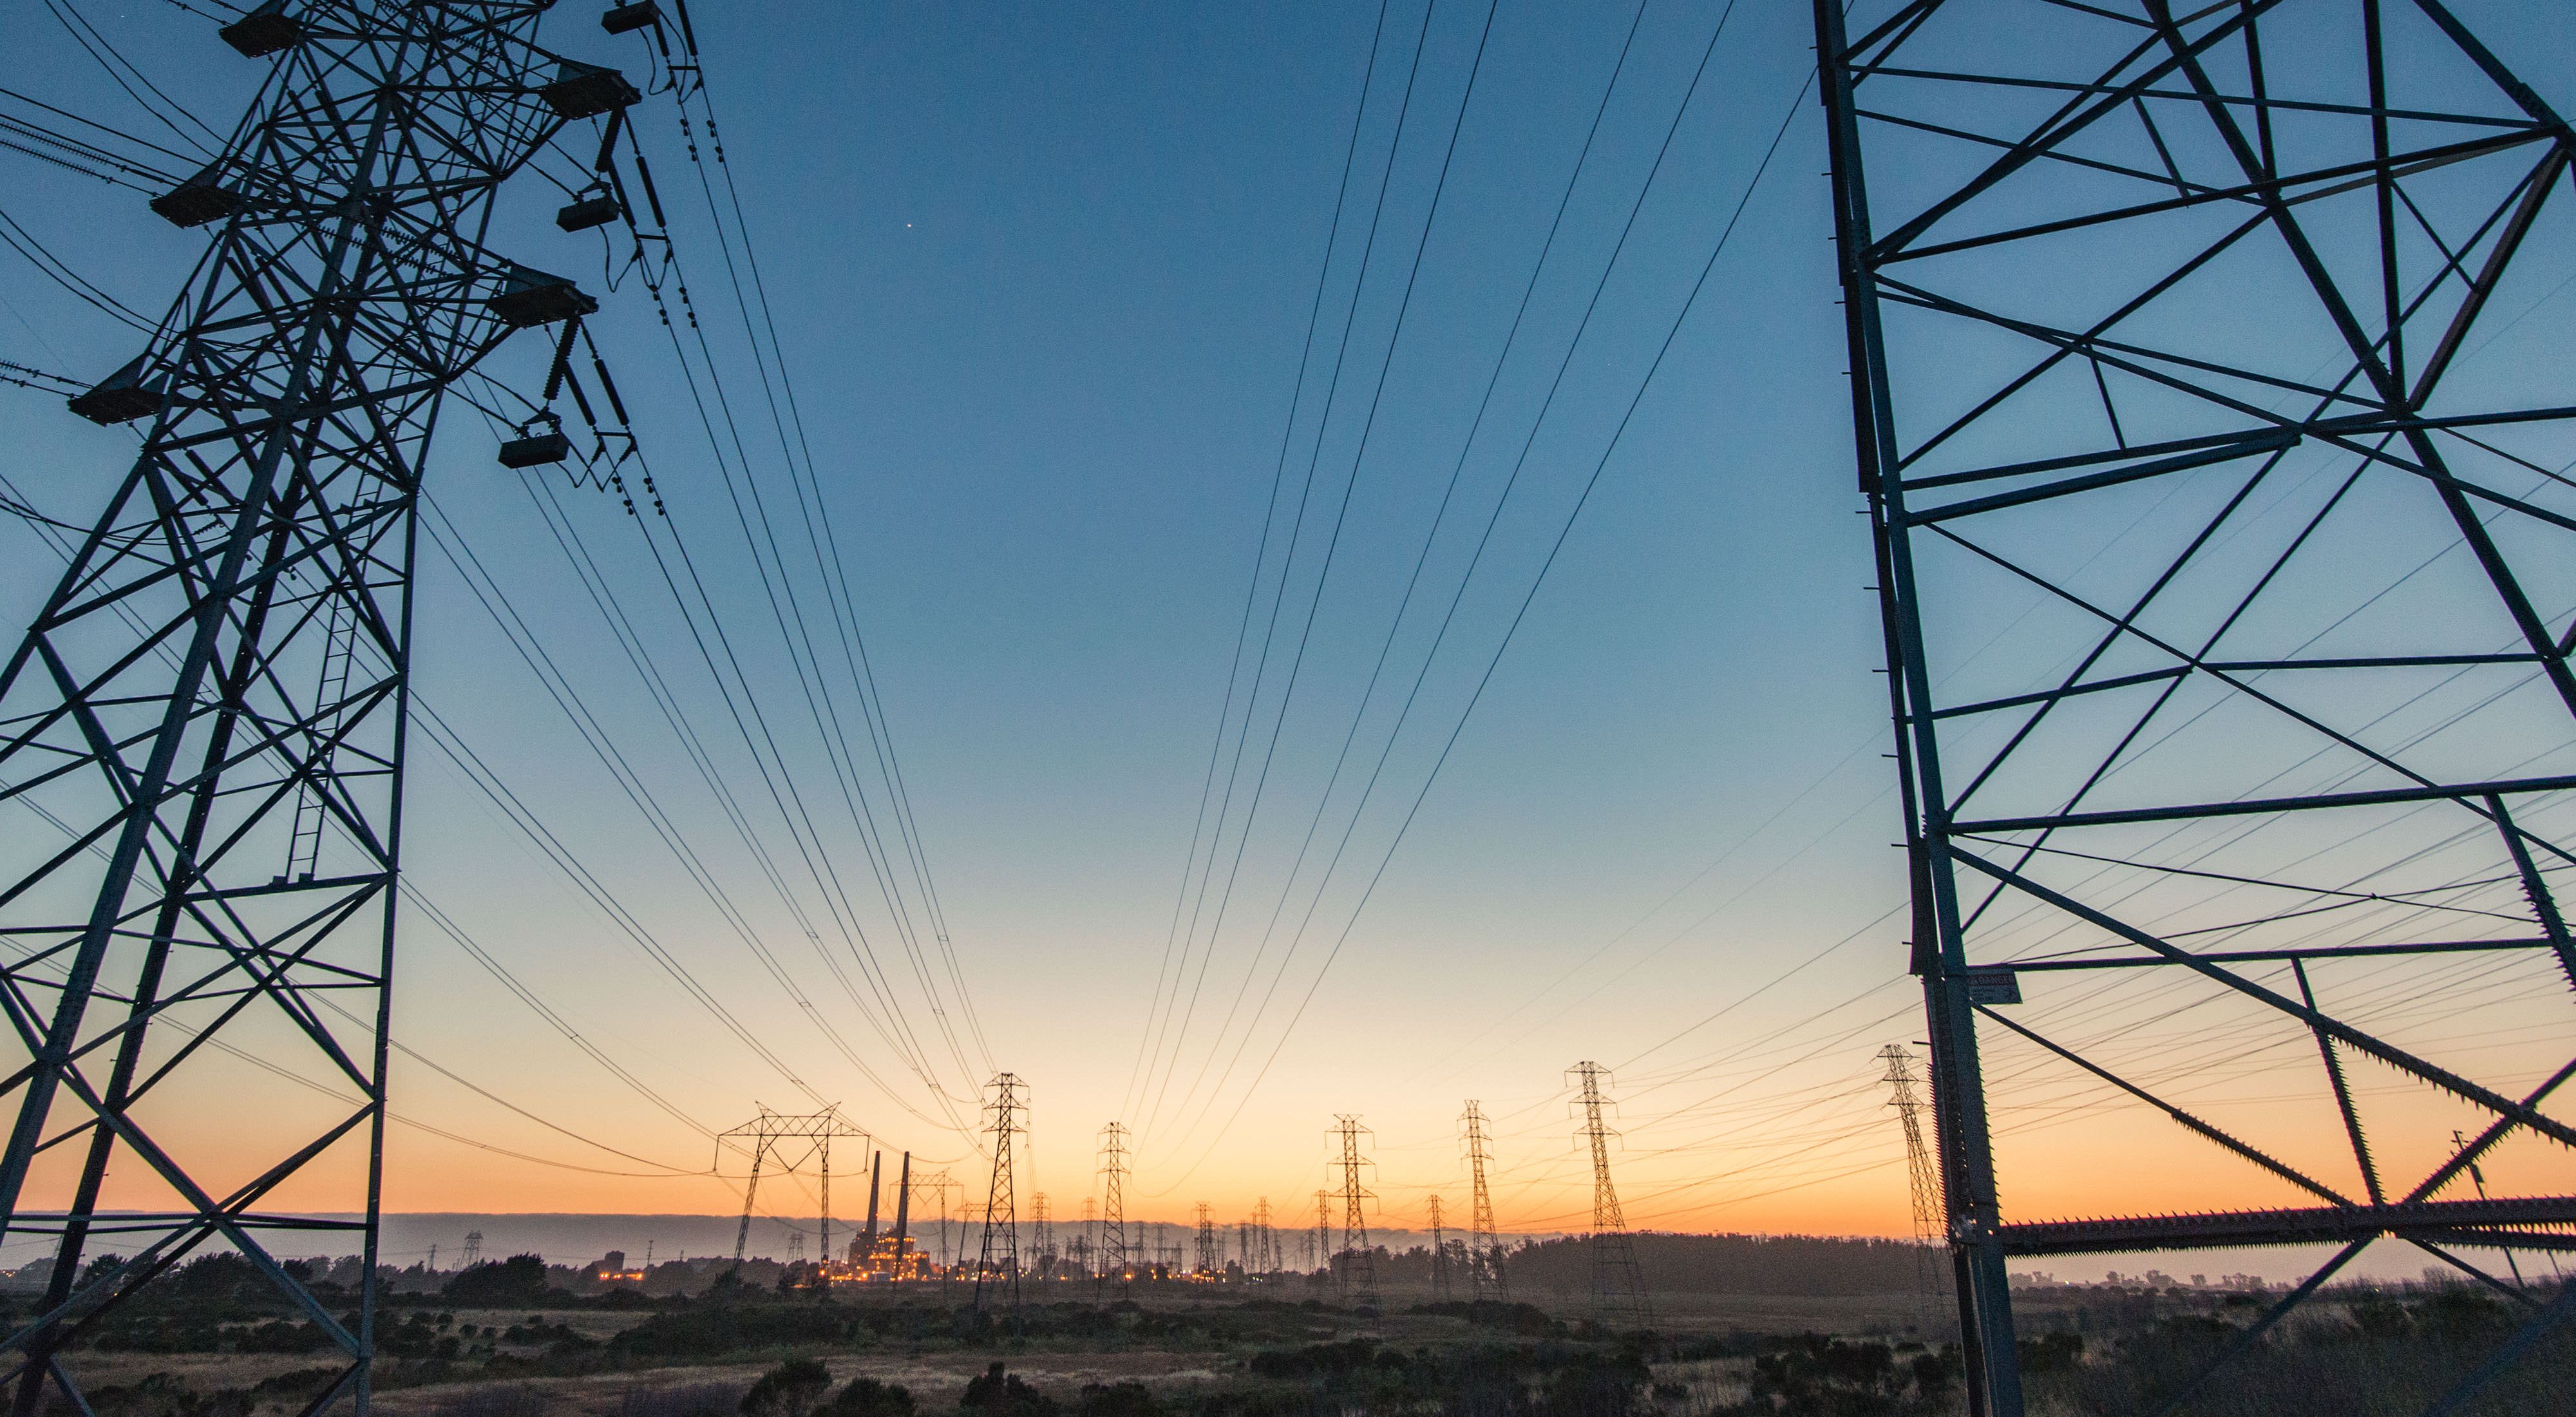 A photo of electrical transmission lines to the horizon at sunset.